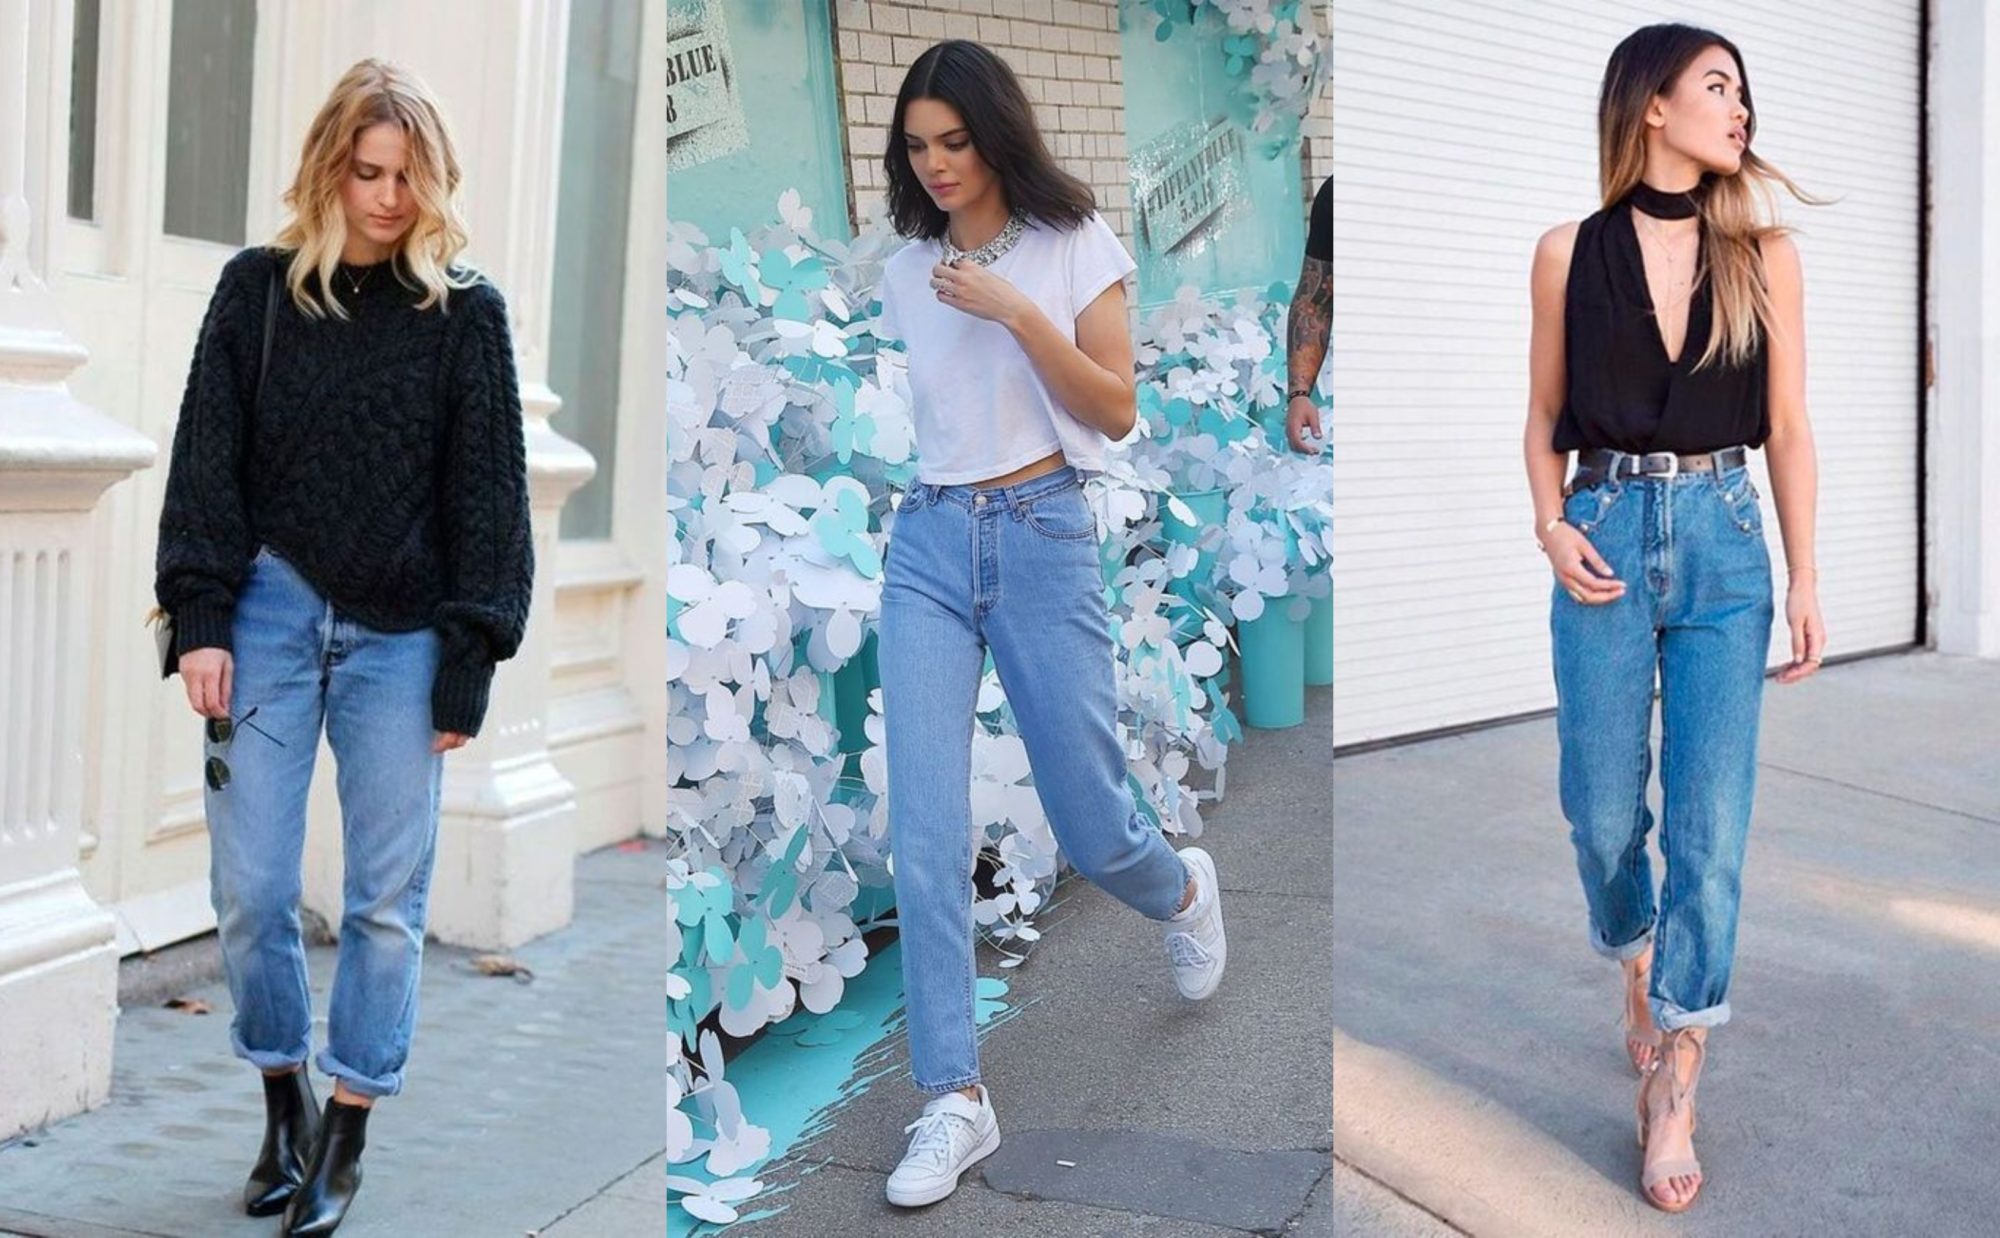 Photos from How to Wear Mom Jeans